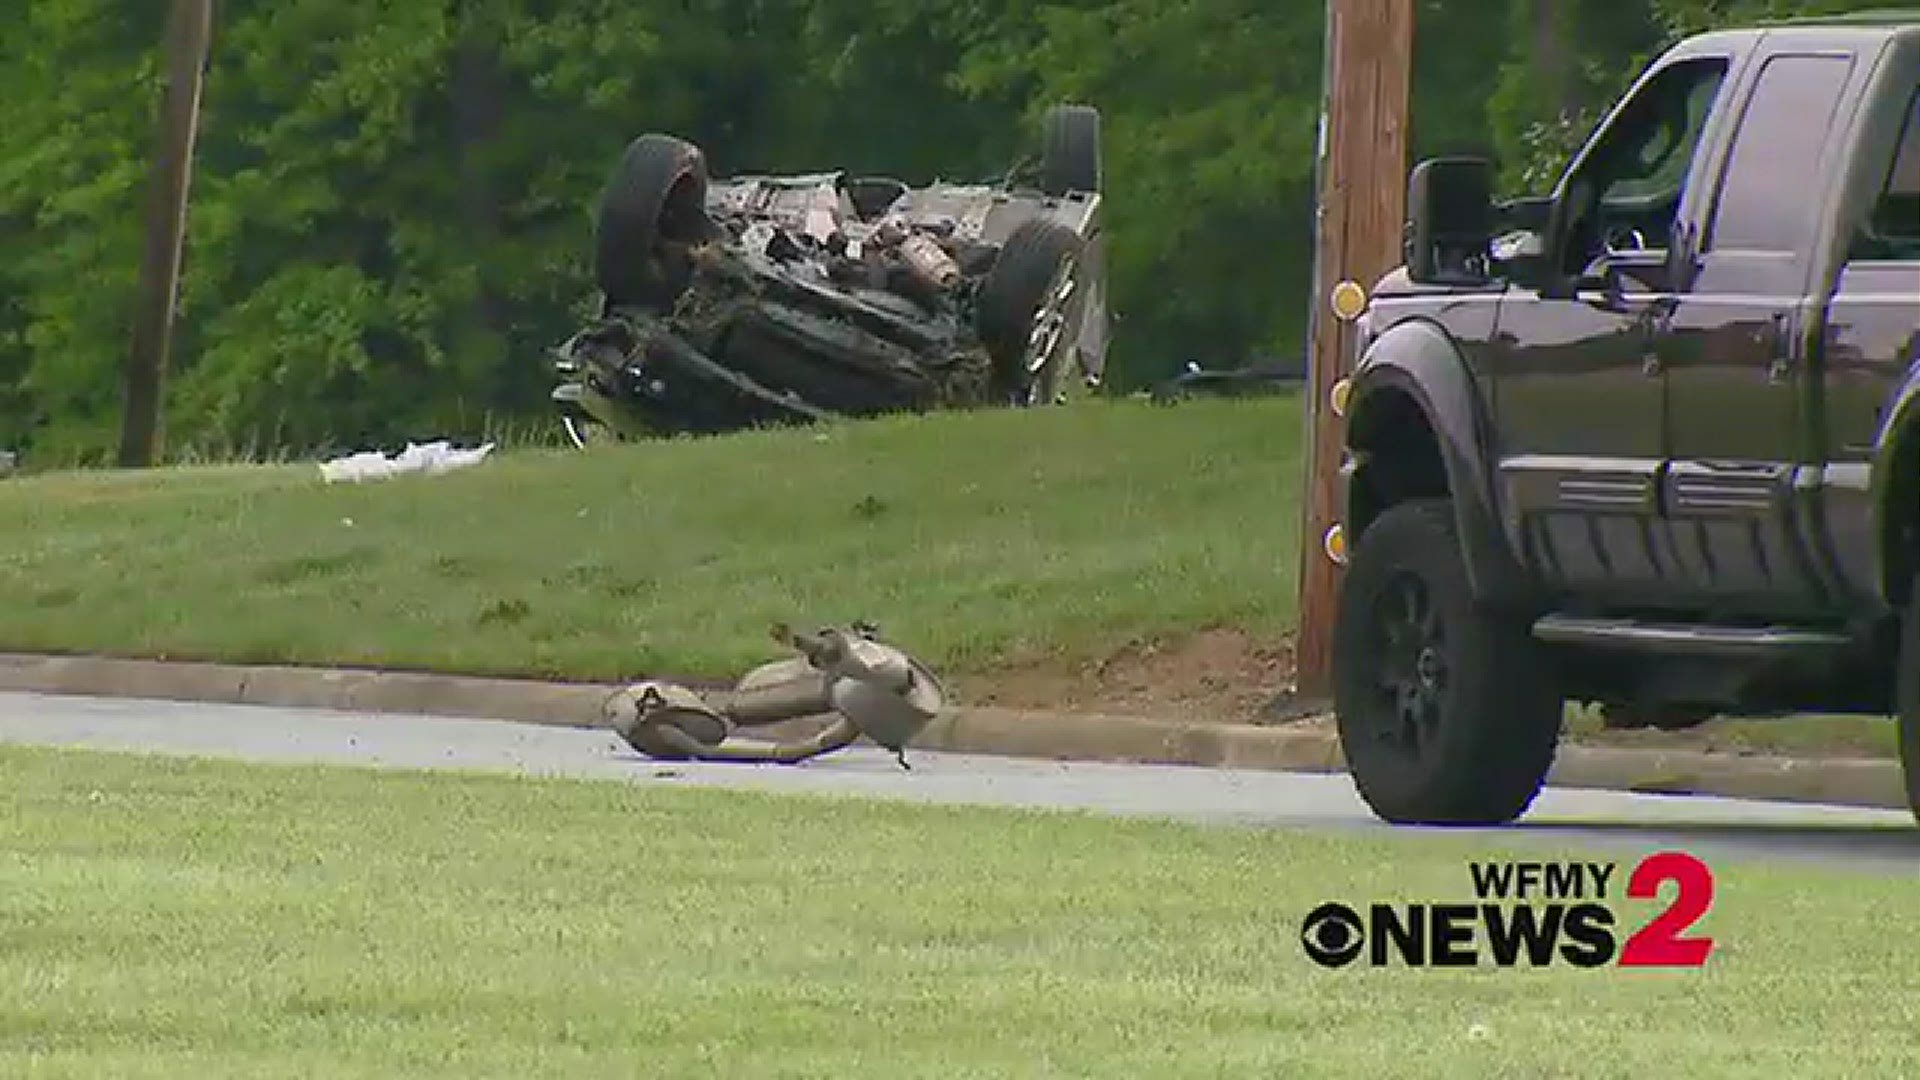 Greensboro police say the single-vehicle crash killed one person and injured three others.